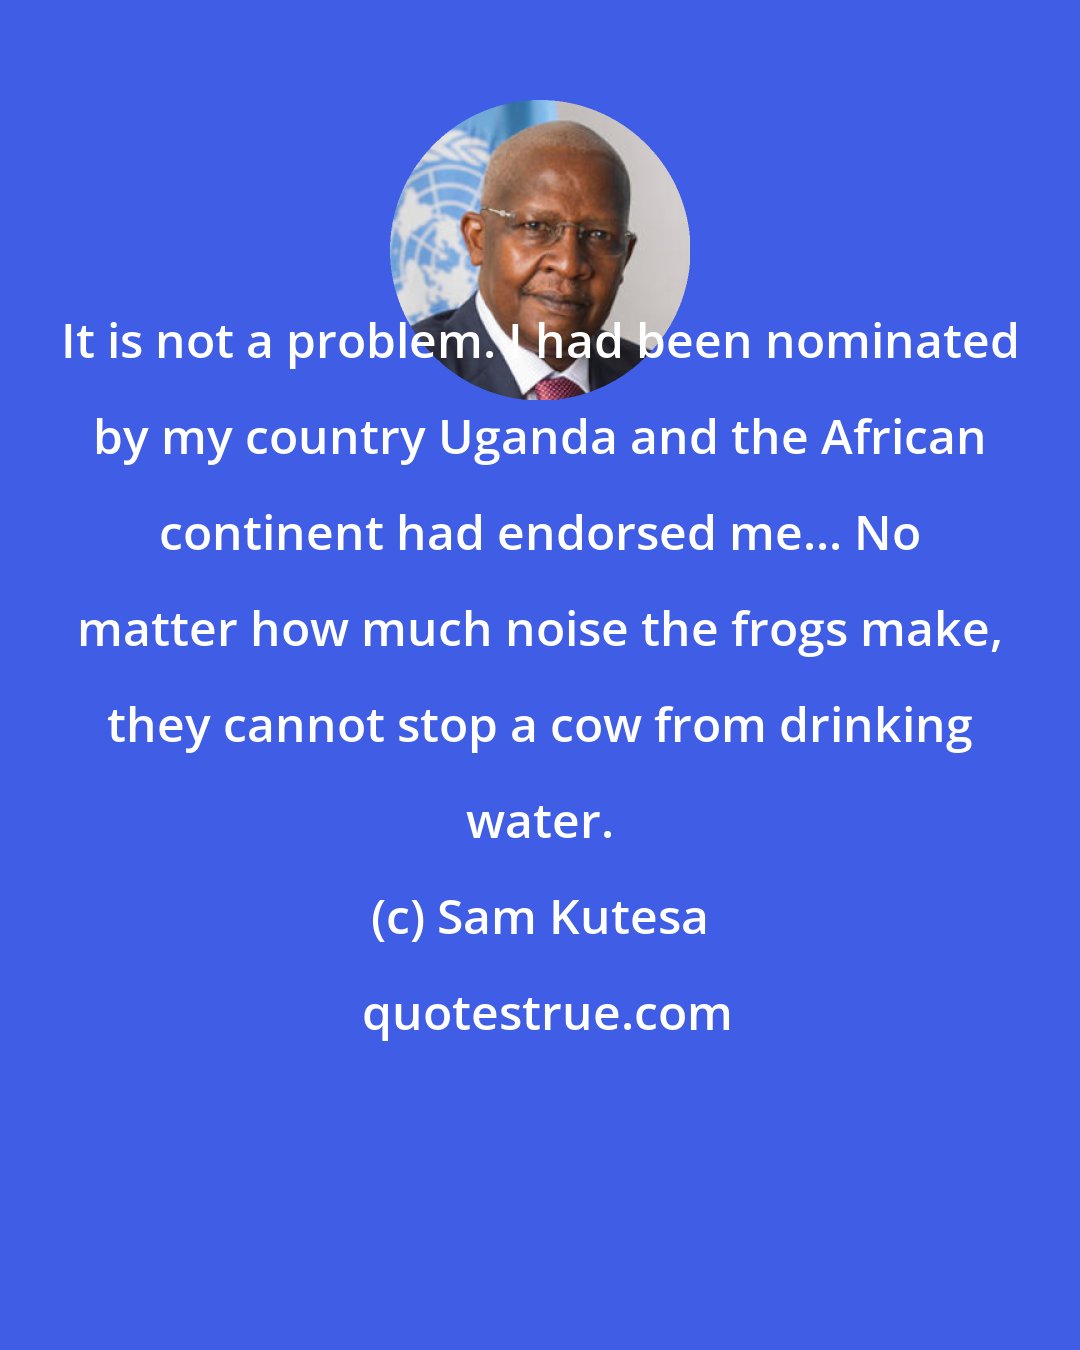 Sam Kutesa: It is not a problem. I had been nominated by my country Uganda and the African continent had endorsed me... No matter how much noise the frogs make, they cannot stop a cow from drinking water.